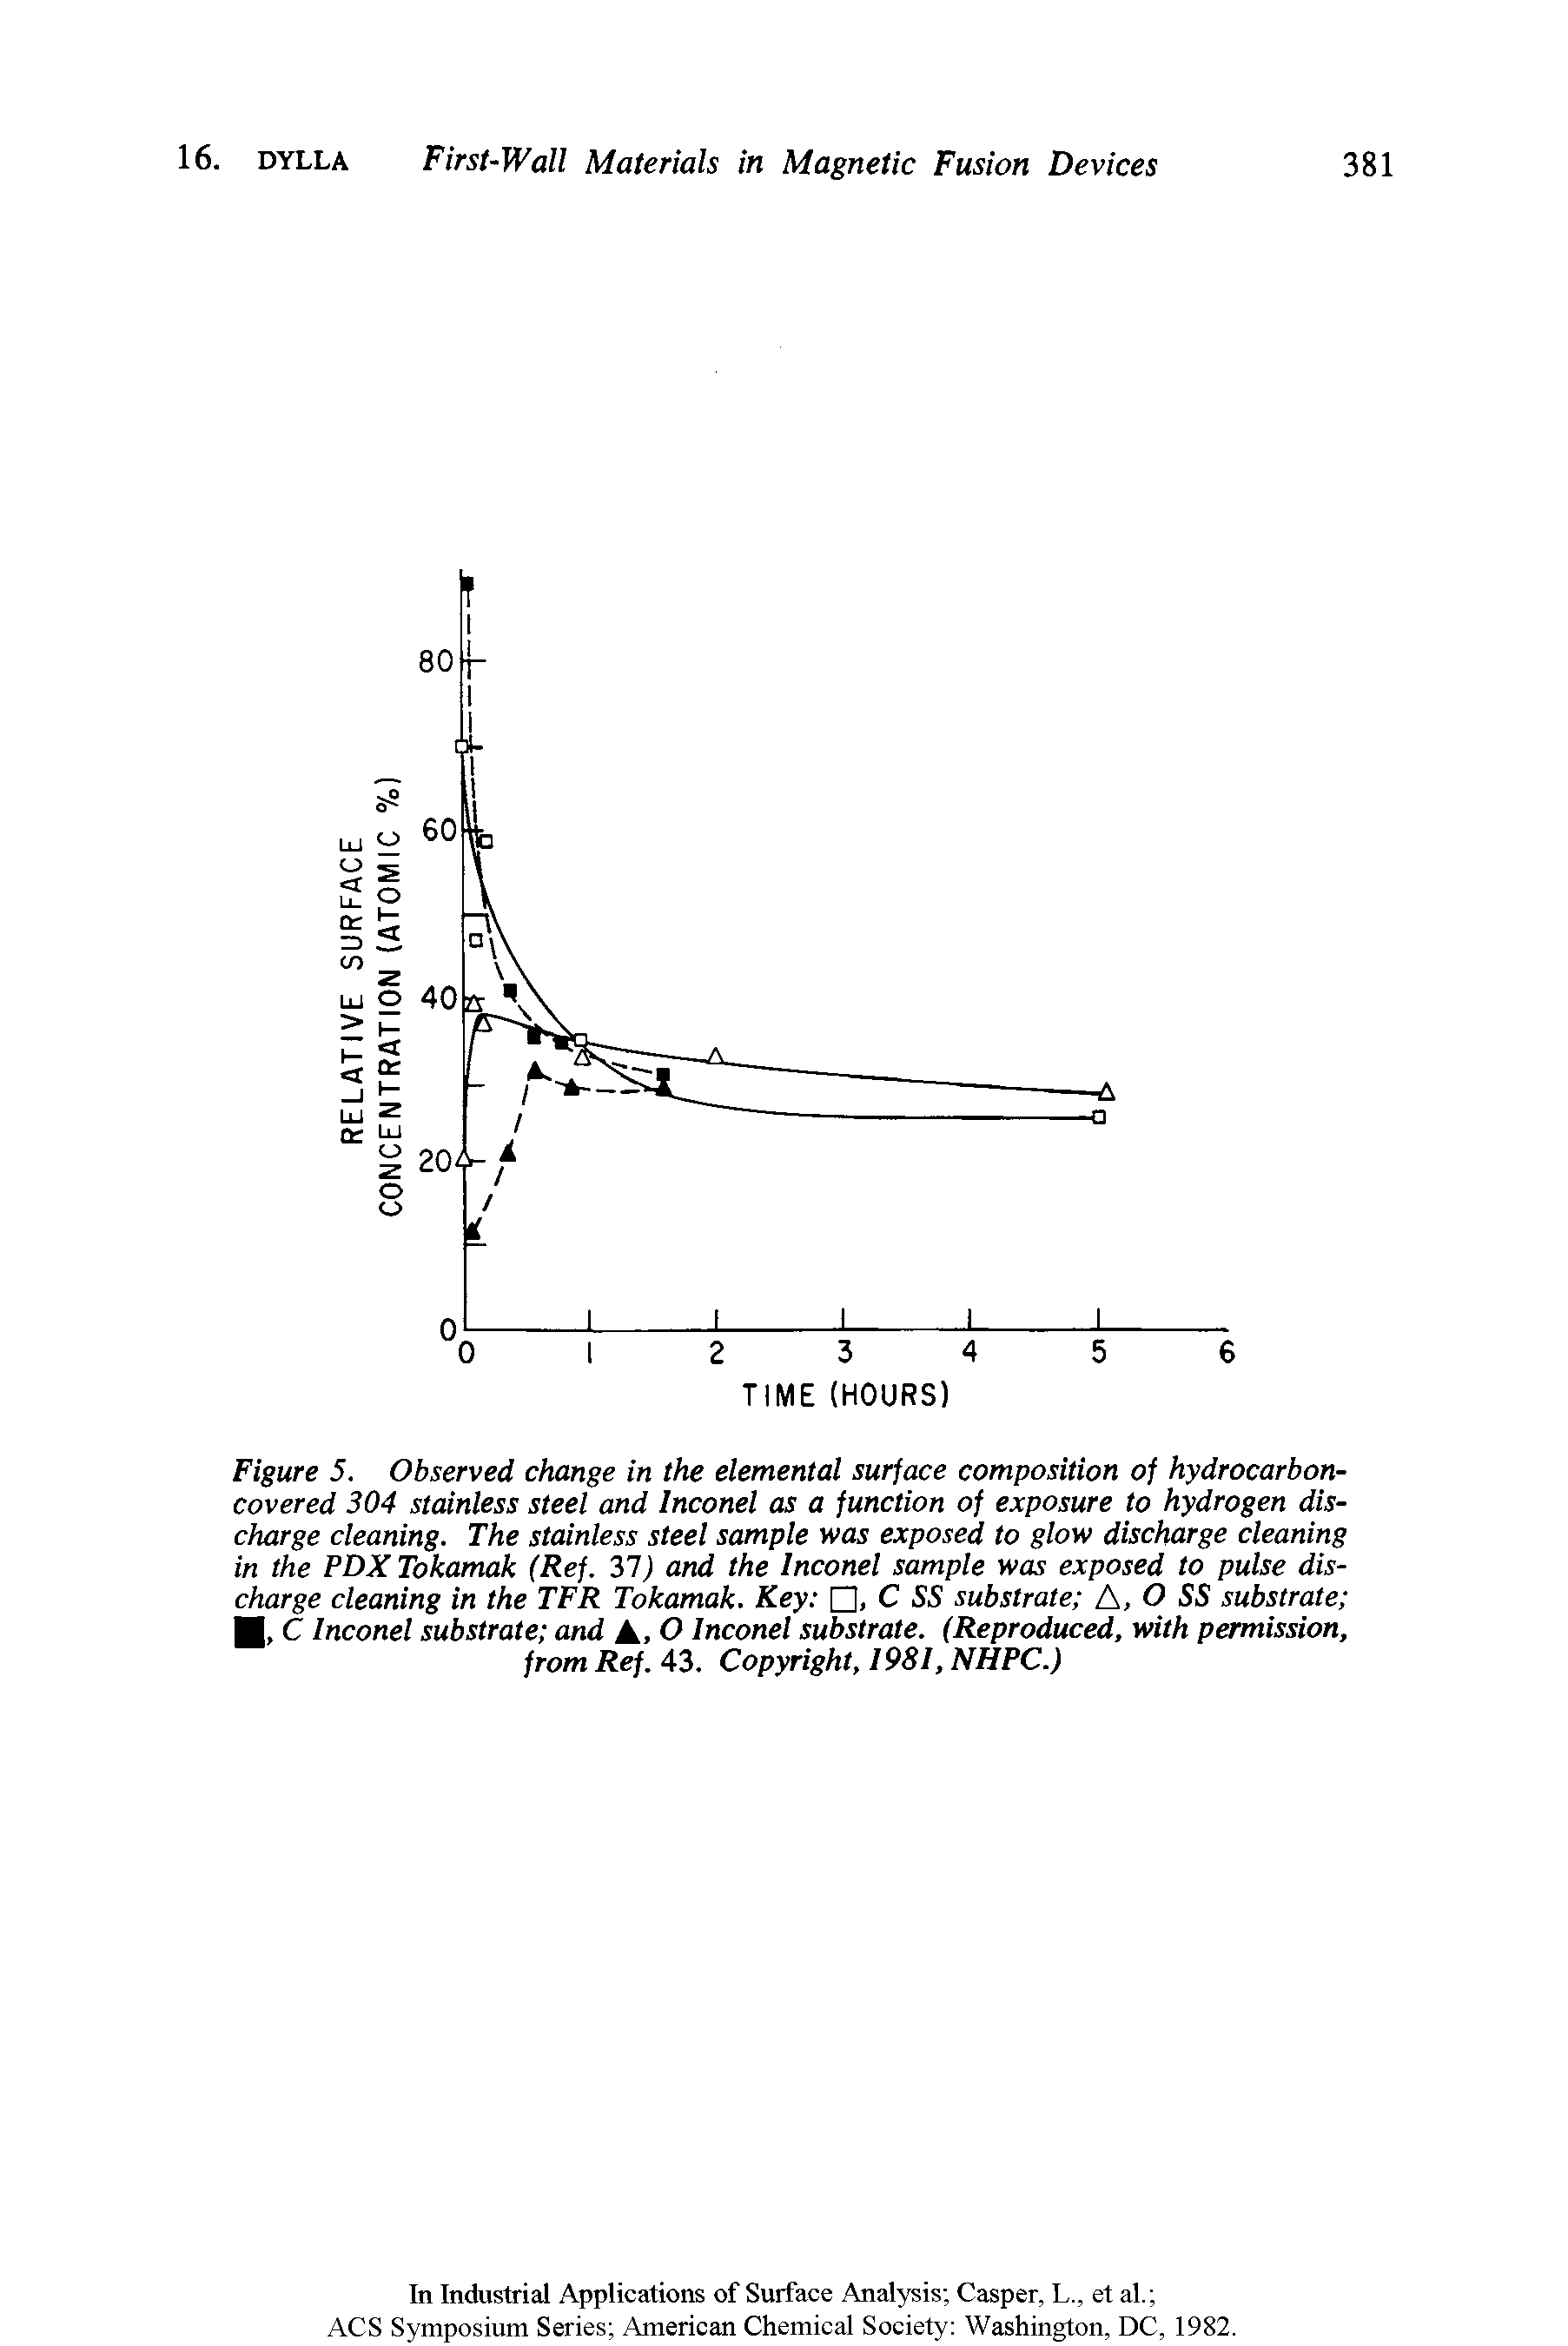 Figure 5. Observed change in the elemental surface composition of hydrocarbon-covered 304 stainless steel and Inconel as a function of exposure to hydrogen discharge cleaning. The stainless steel sample was exposed to glow discharge cleaning in the PDXTokamak (Ref. 37J and the Inconel sample was exposed to pulse discharge cleaning in the TFR Tokamak. Key , C SS substrate A, O SS substrate ...